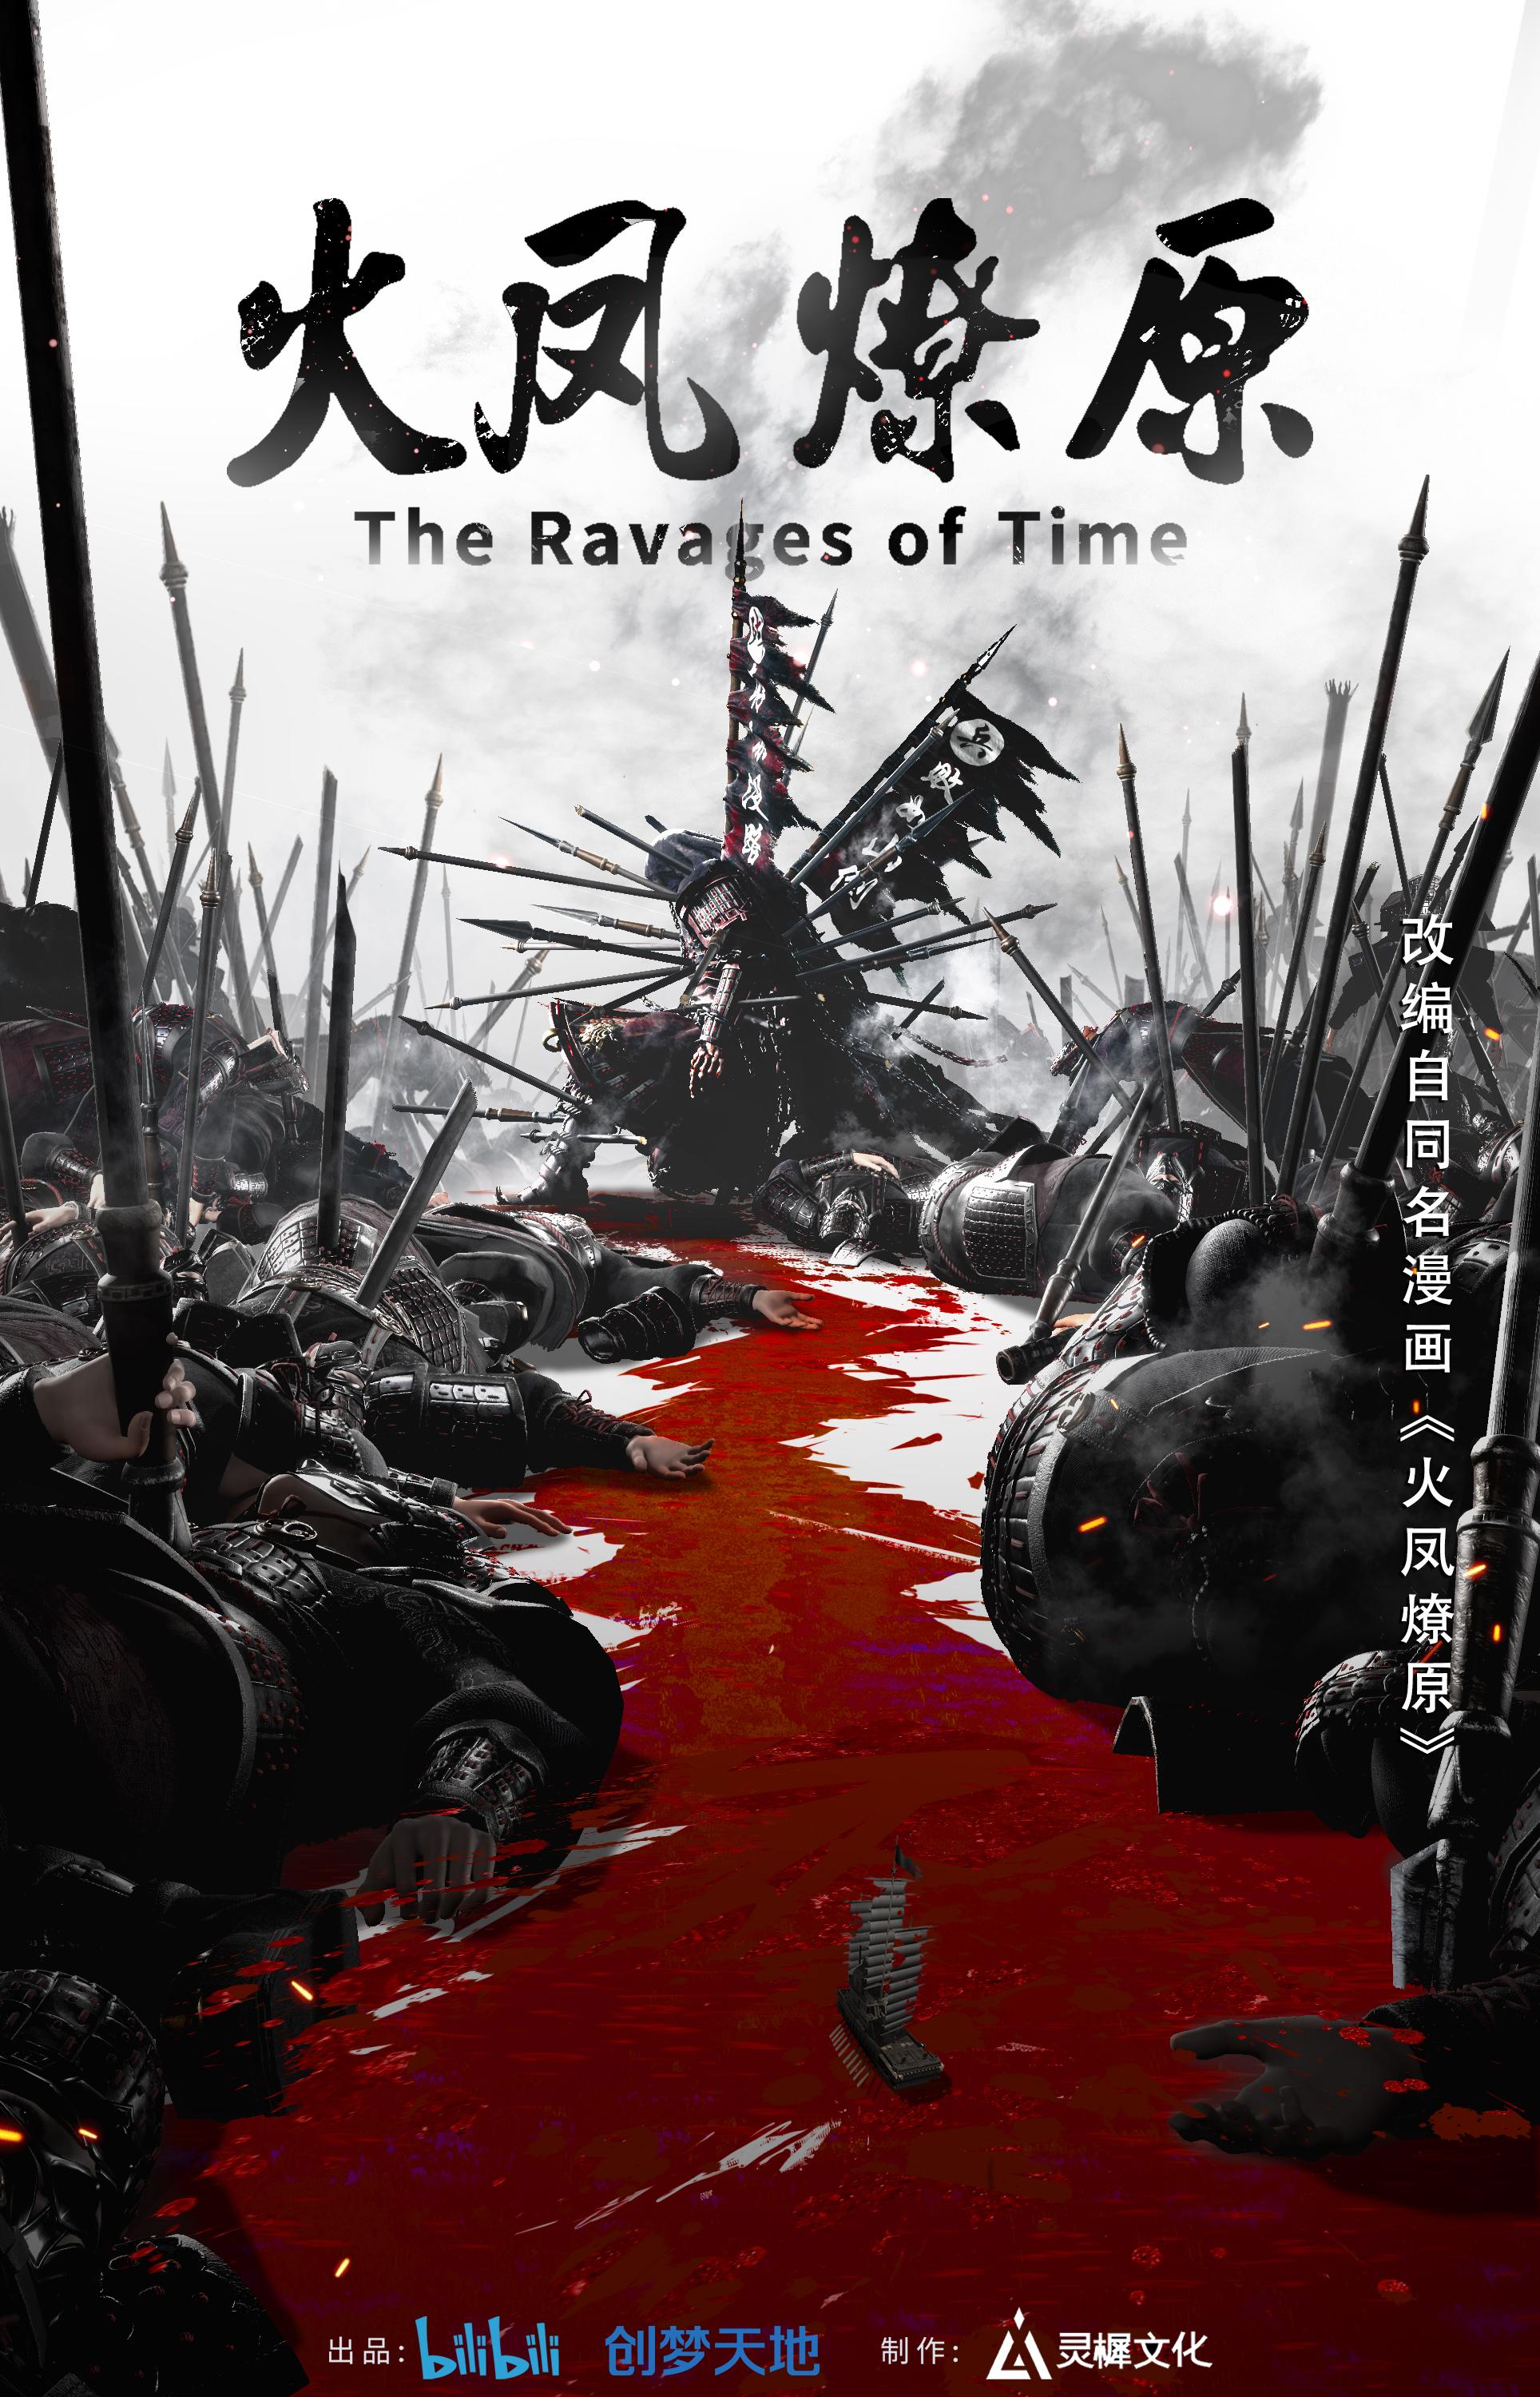 TV ratings for The Ravages Of Time (火凤燎原) in Mexico. Bilibili TV series